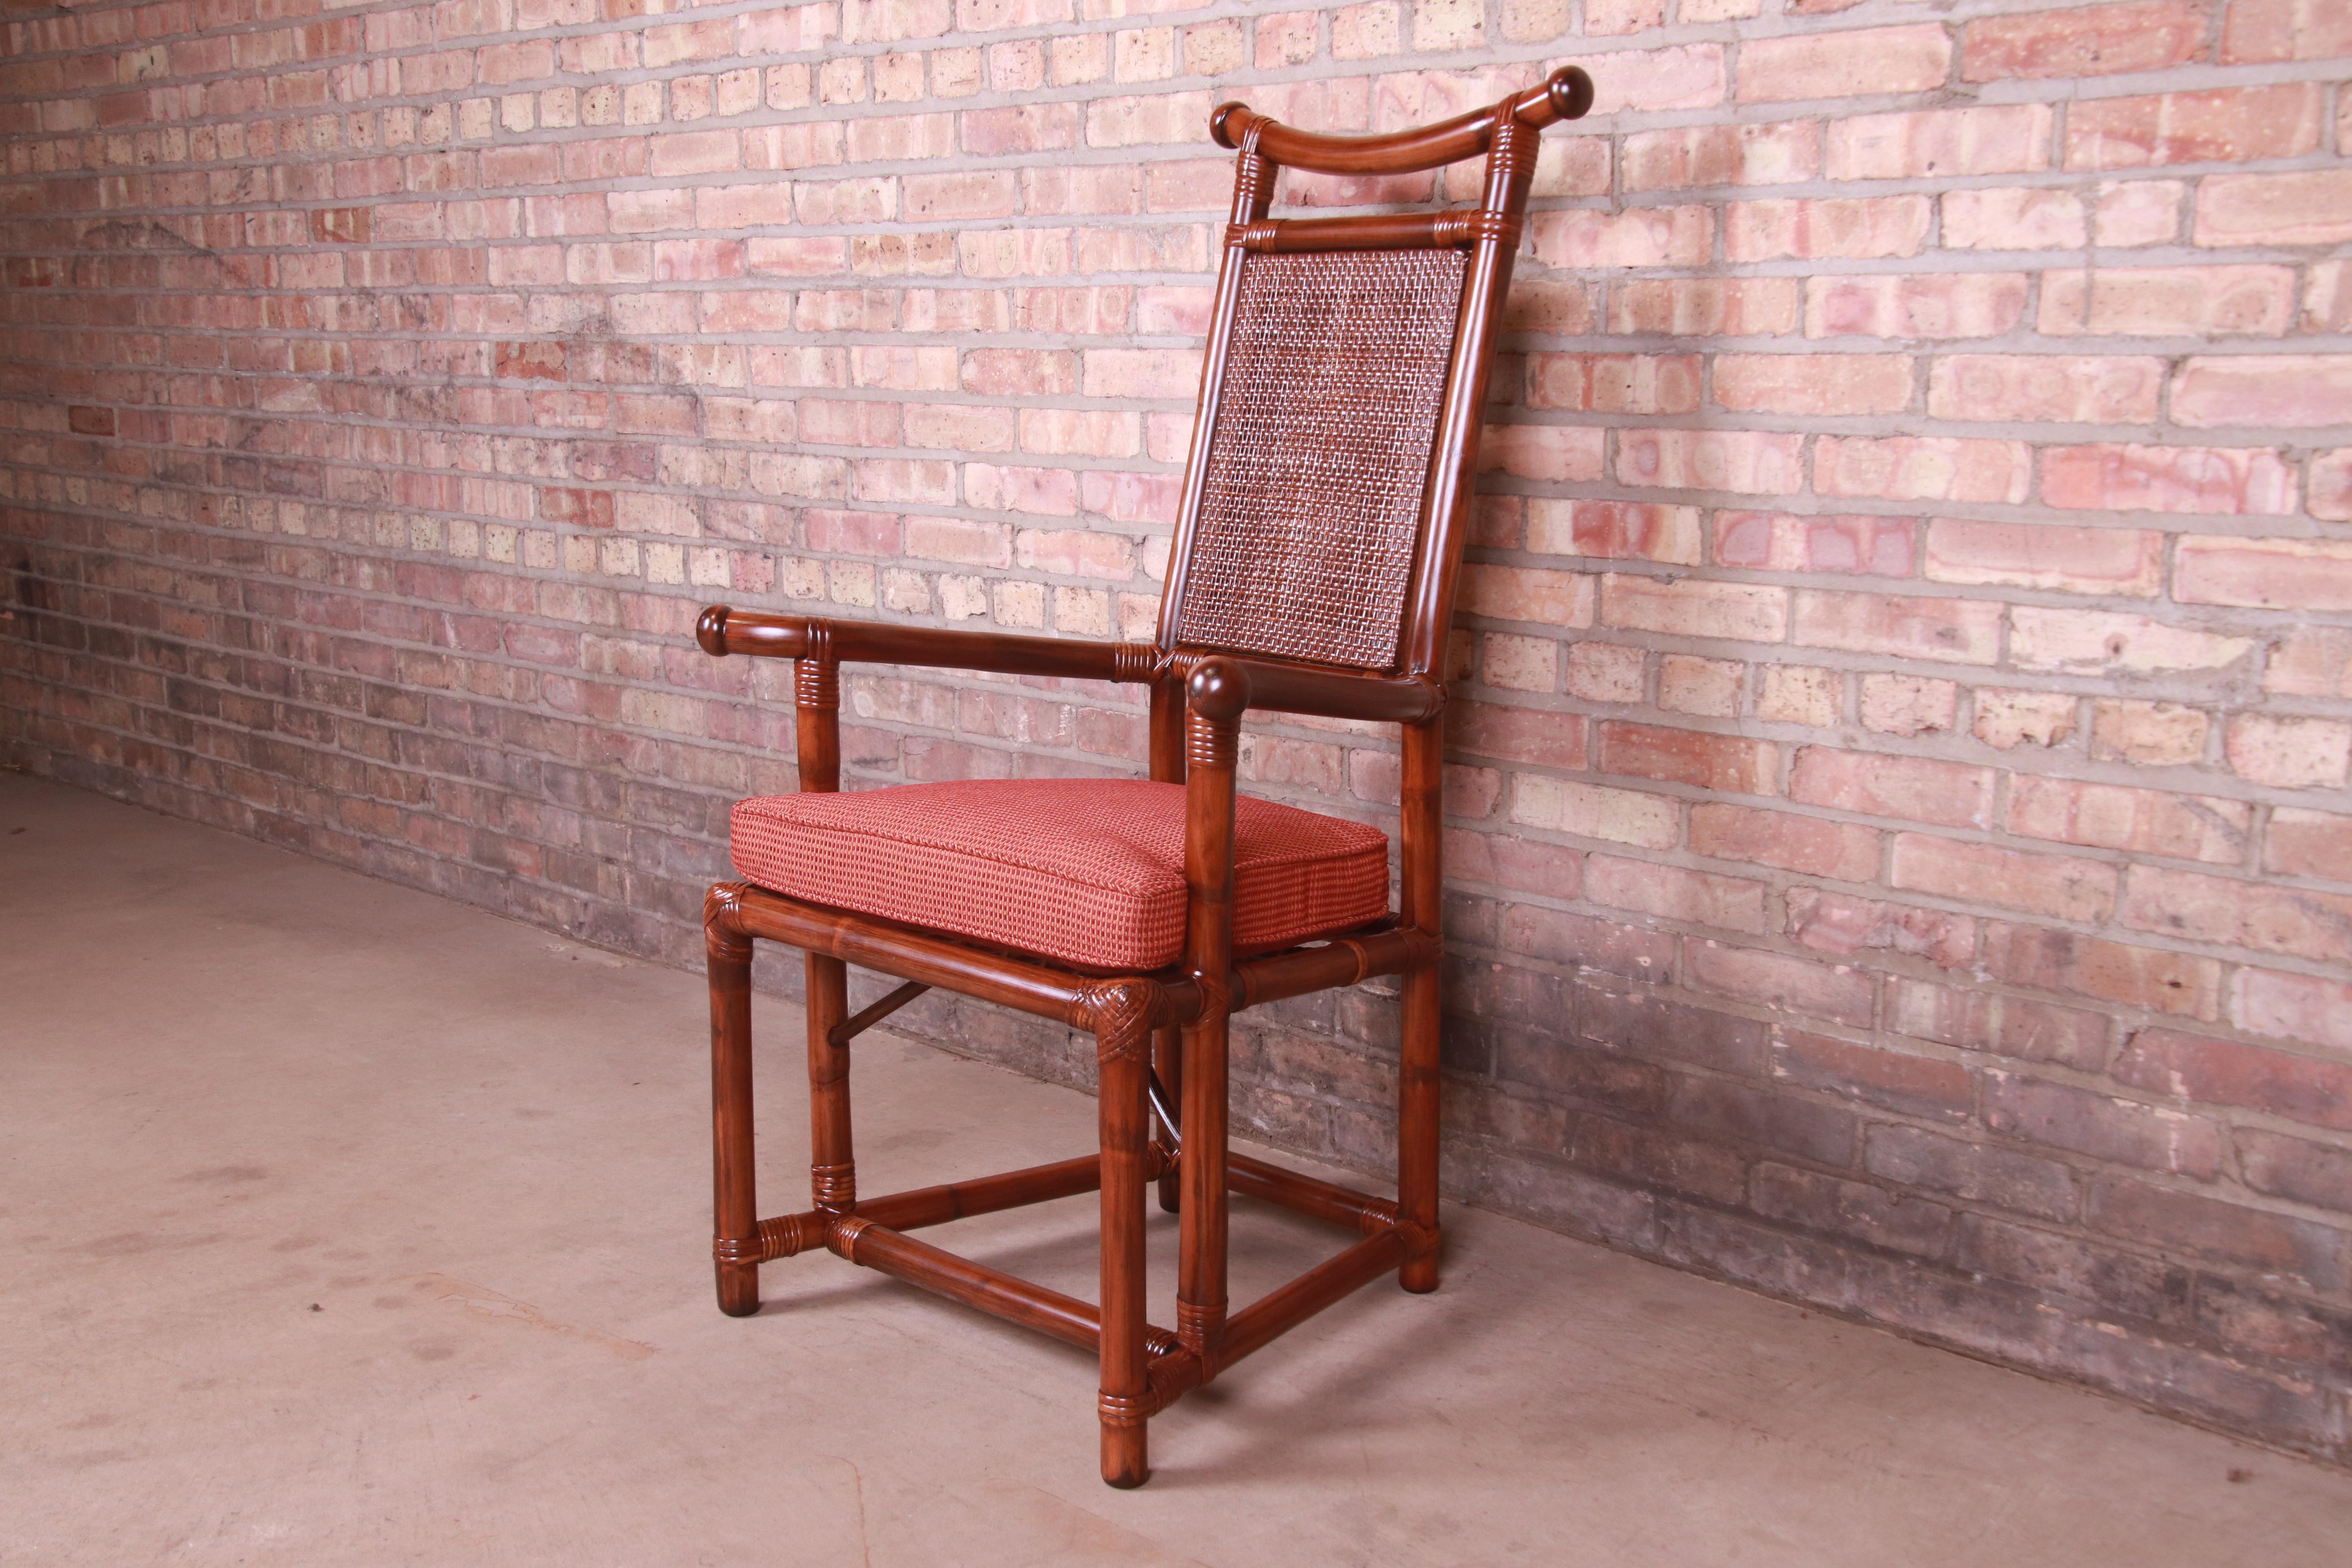 Henry Olko for Willow and Reed Sculpted Rattan and Cane Throne Chairs, Pair In Good Condition For Sale In South Bend, IN